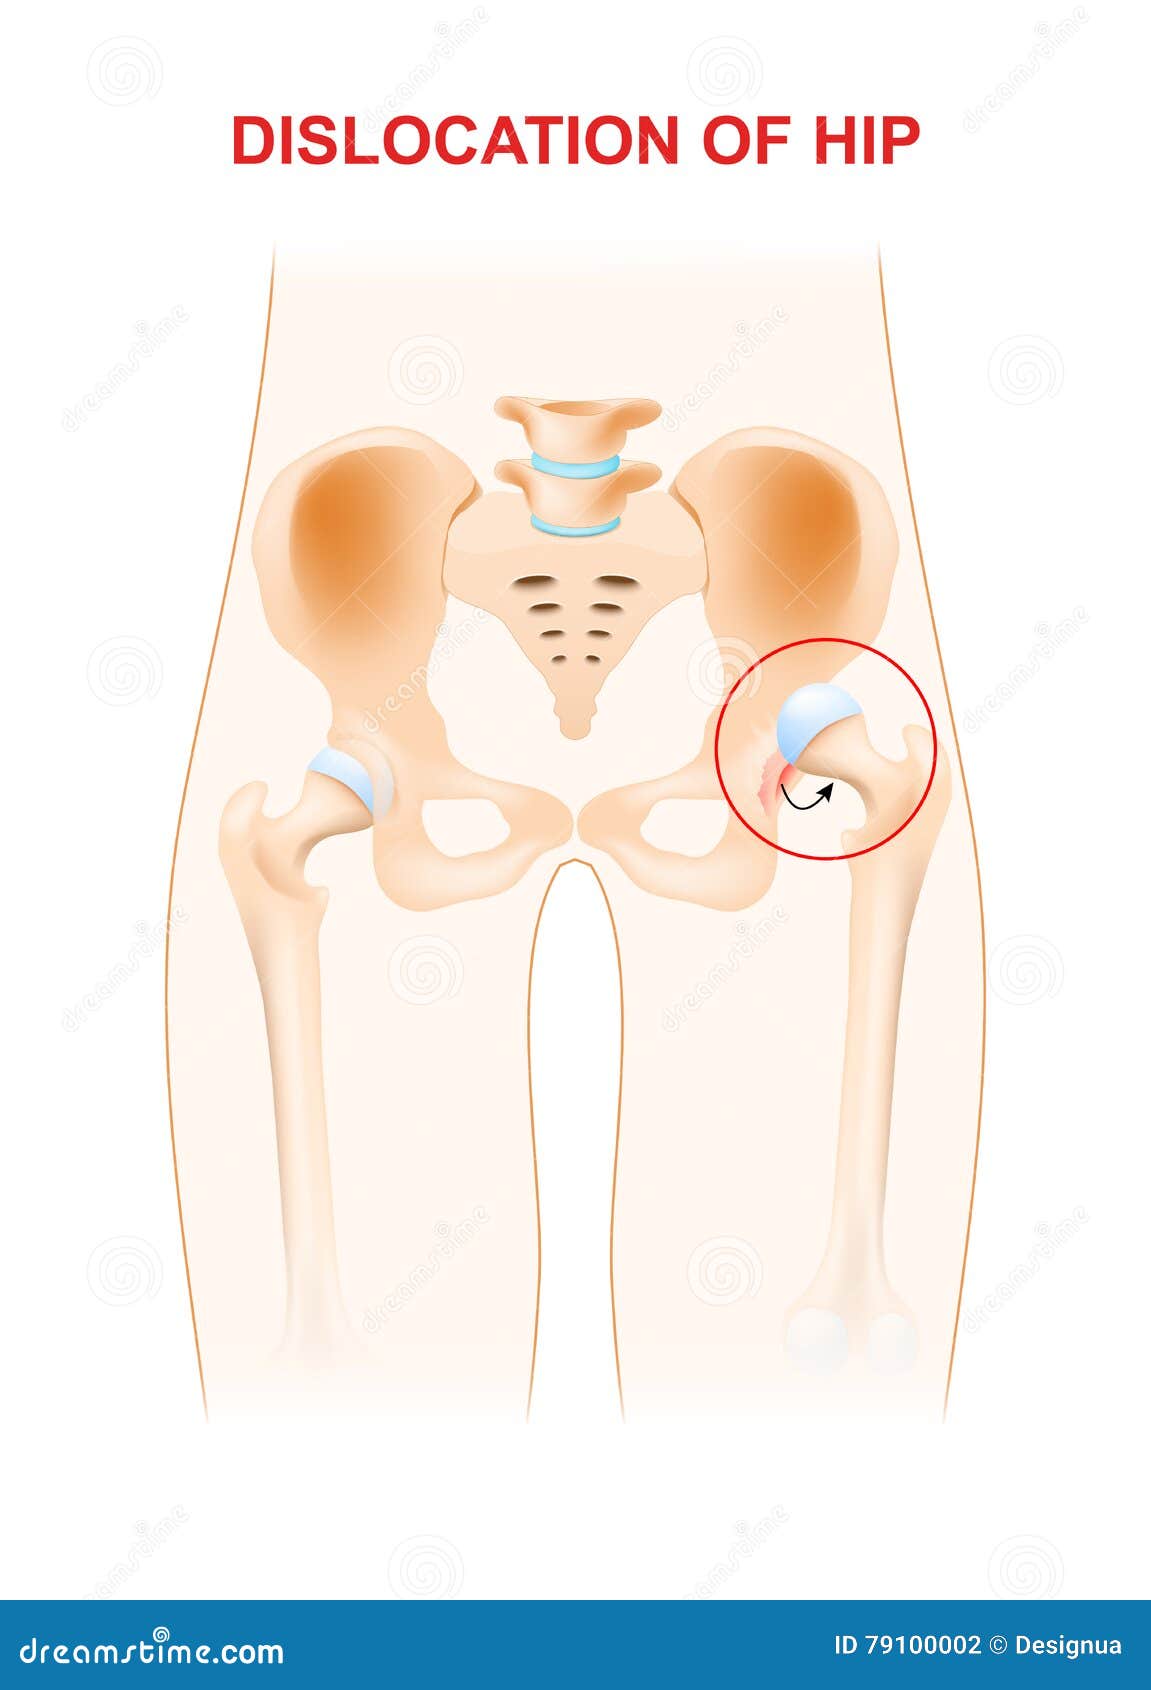 dislocation of hip